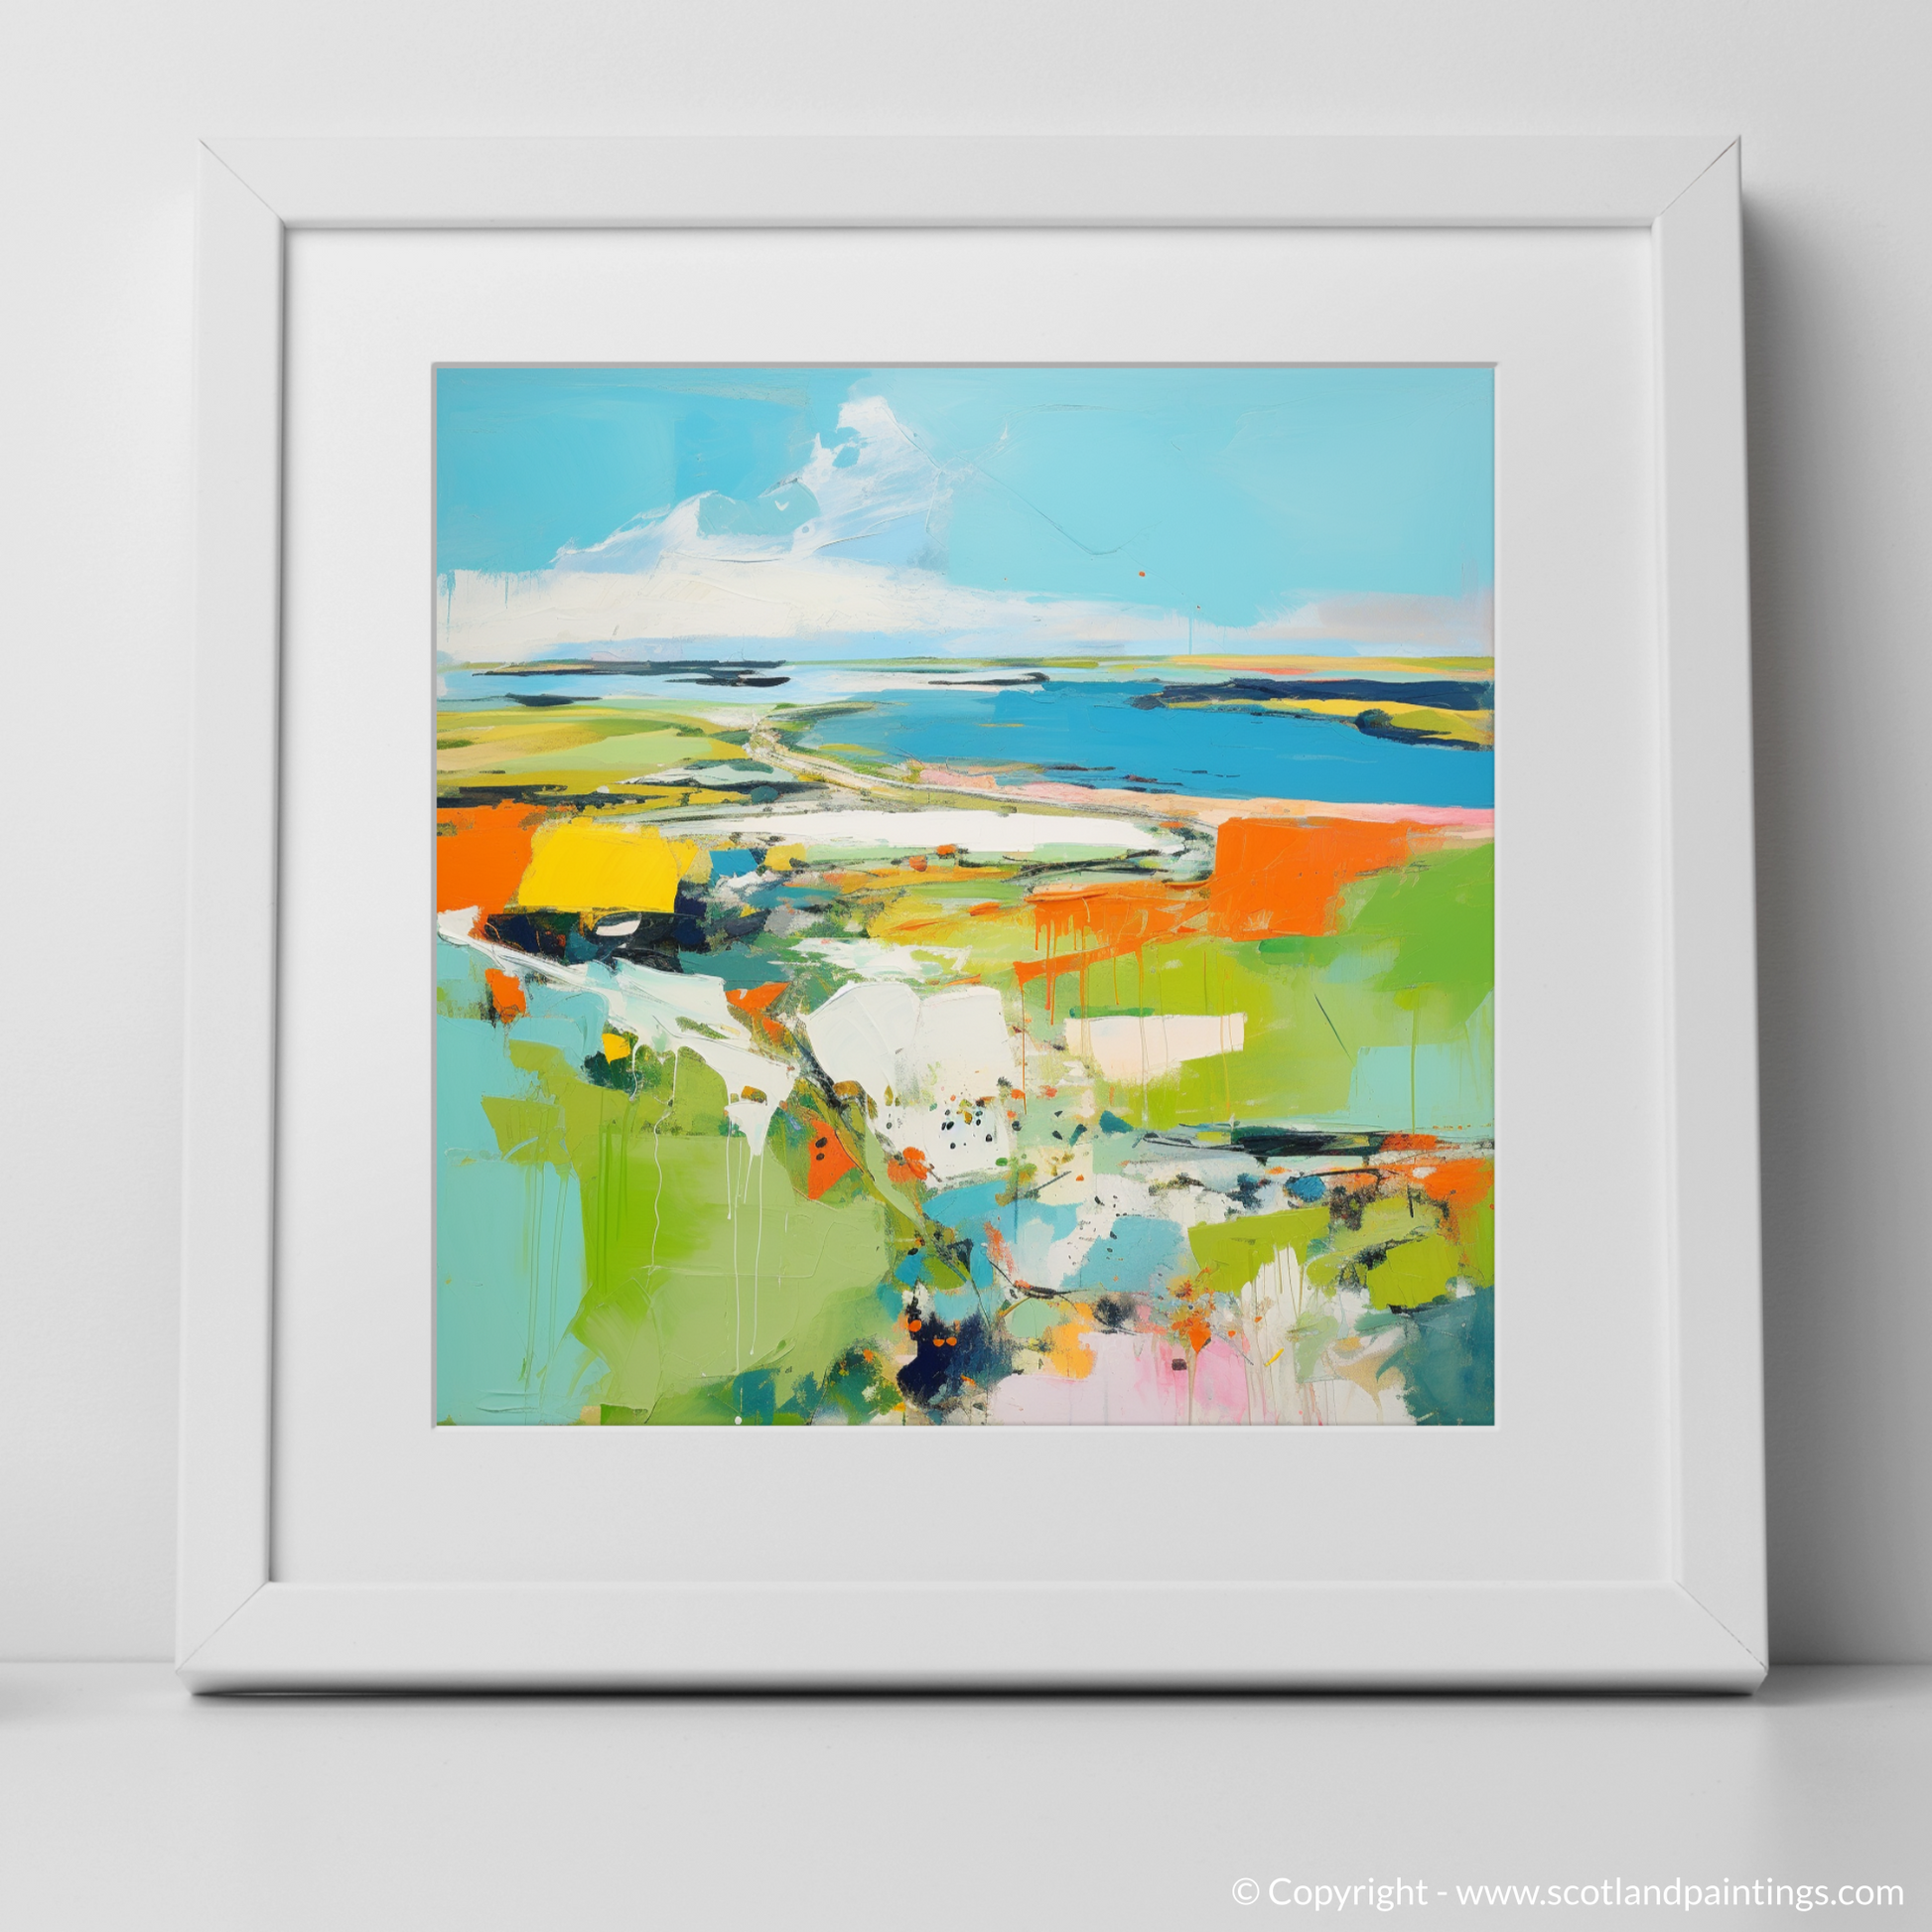 Art Print of Orkney, North of mainland Scotland in summer with a white frame